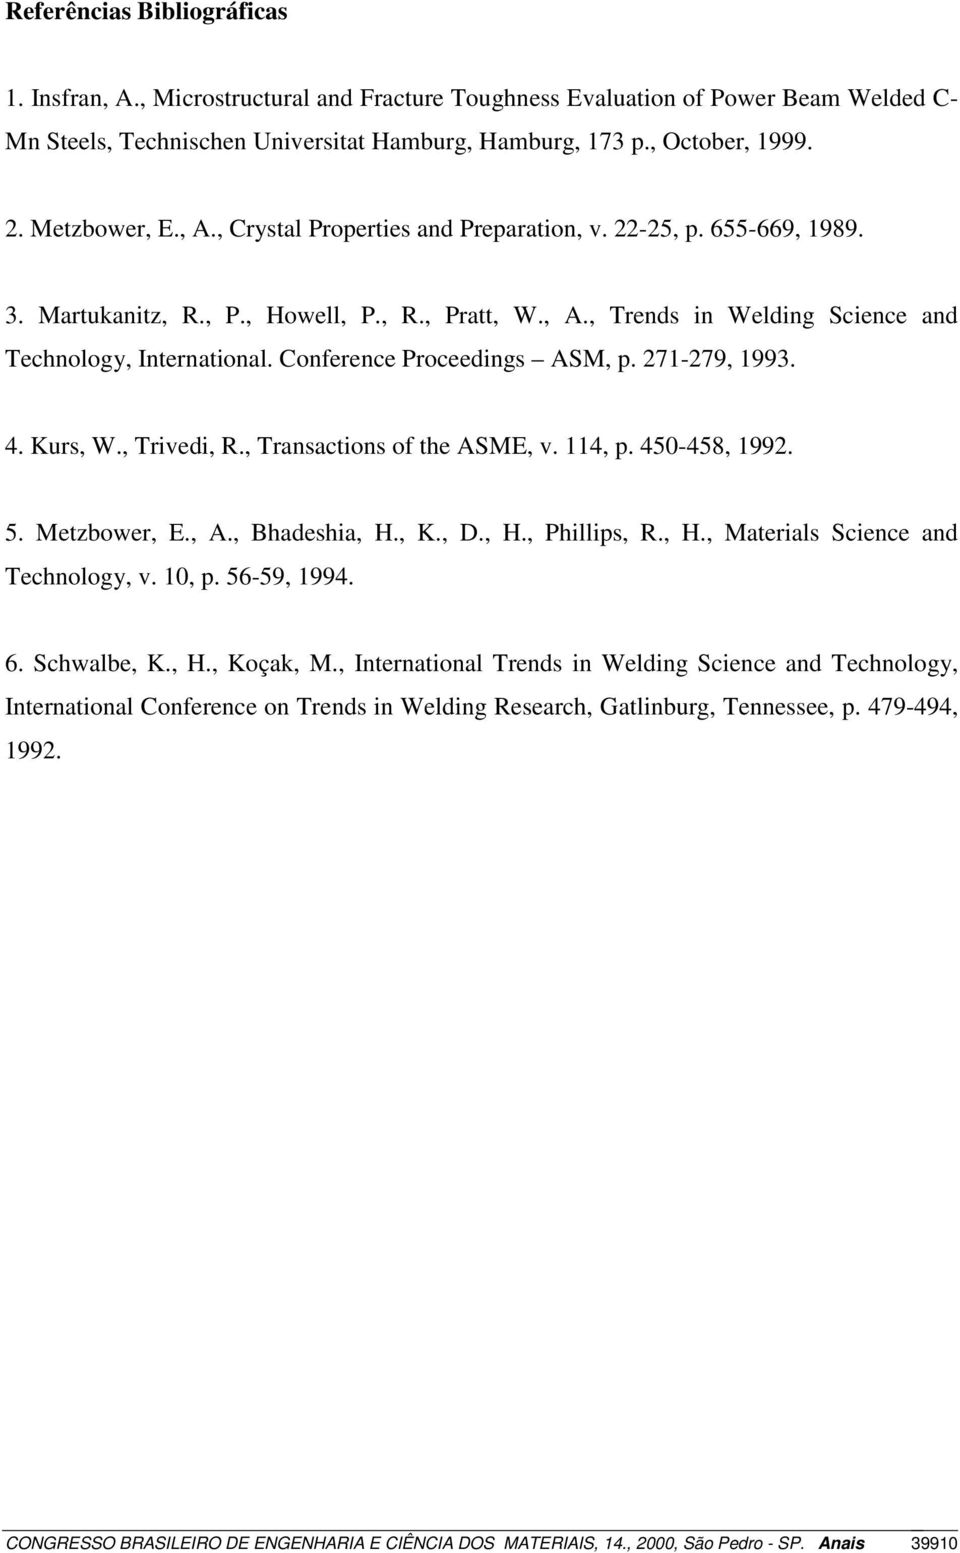 Conference Proceedings ASM, p. 271-279, 1993. 4. Kurs, W., Trivedi, R., Transactions of the ASME, v. 114, p. 450-458, 1992. 5. Metzbower, E., A., Bhadeshia, H., K., D., H., Phillips, R., H., Materials Science and Technology, v.